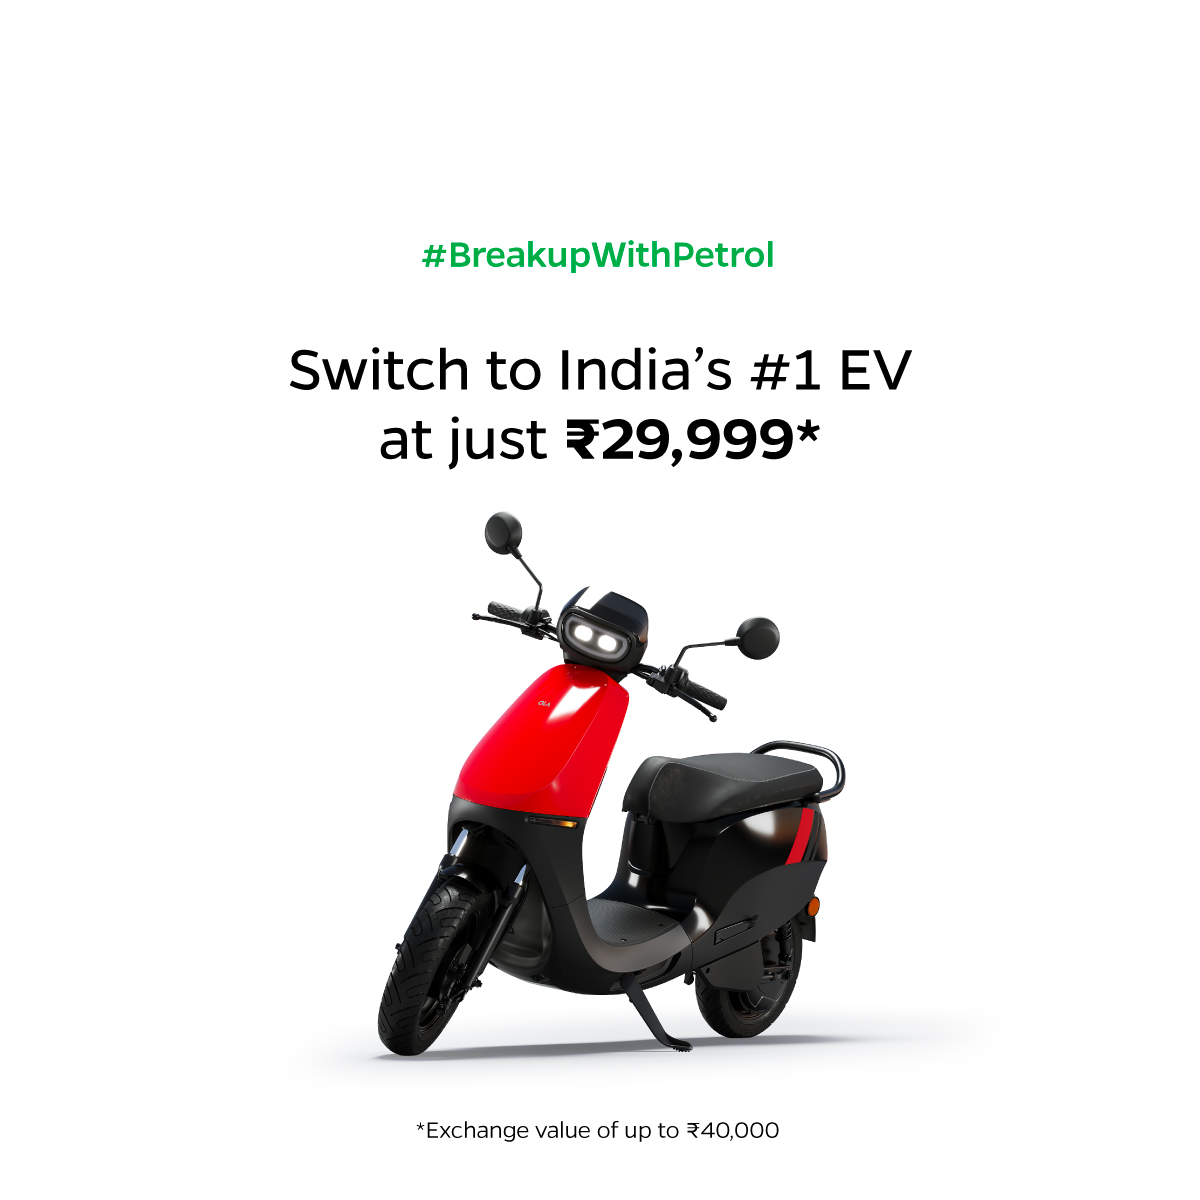 Still in a toxic relationship with a petrol scooter? Ditch it! Switch to electric with the Ola S1. Now! #BreakupWithPetrol